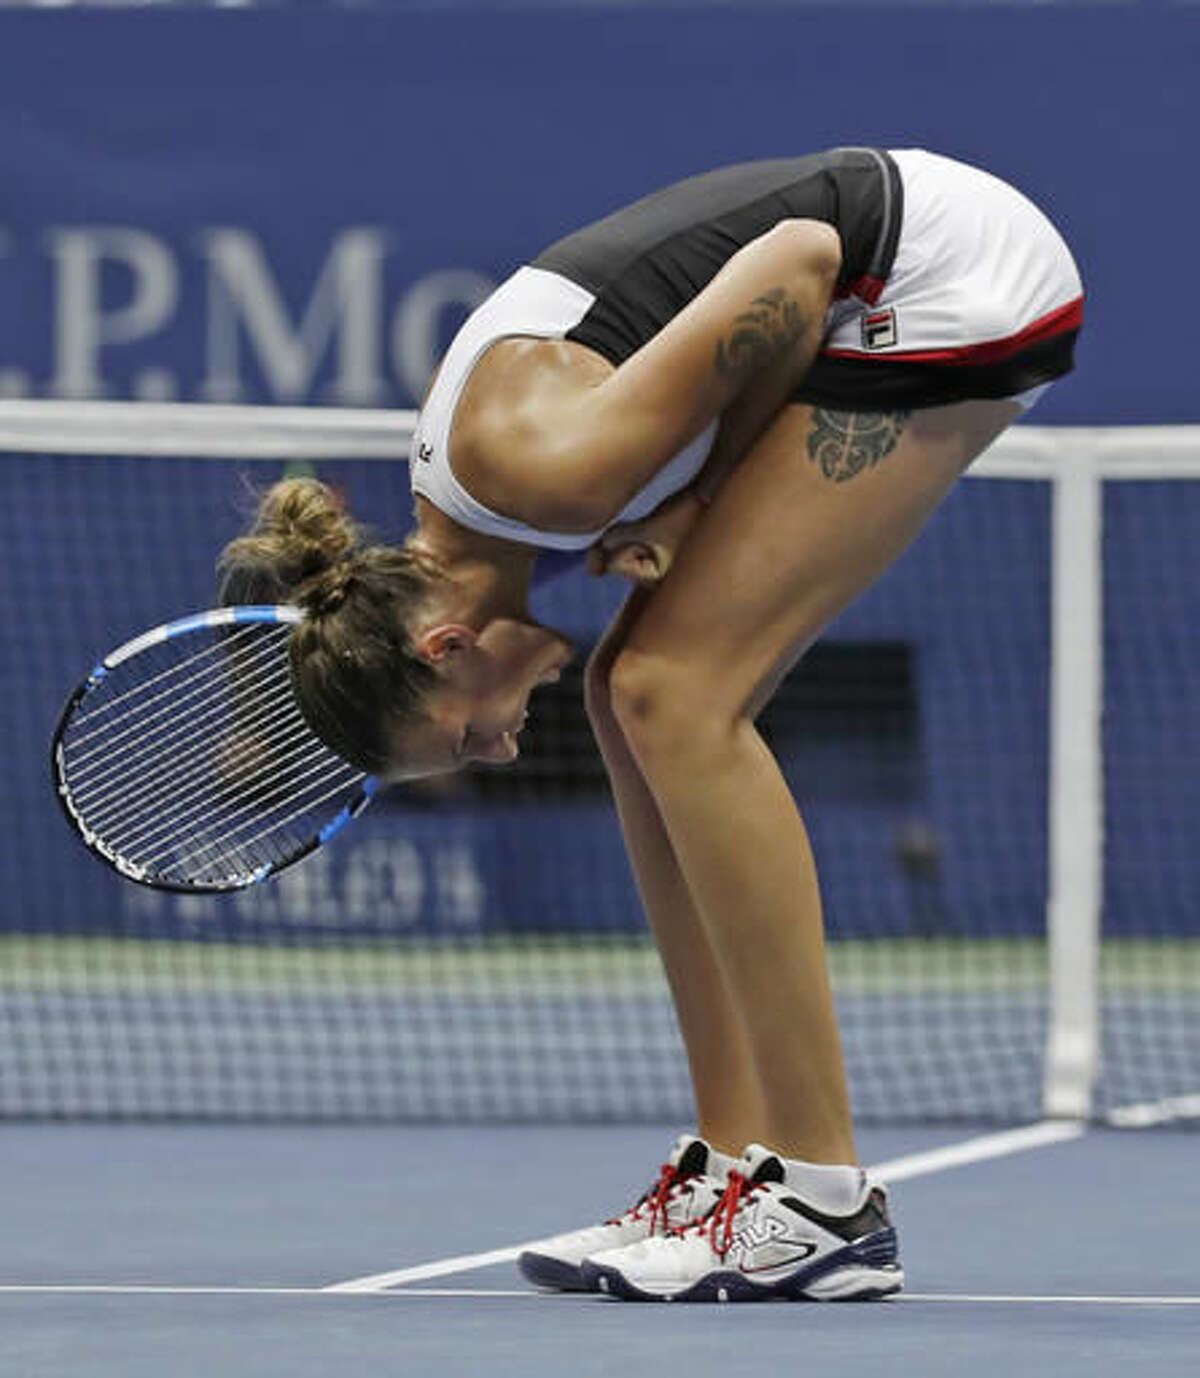 Karolina Pliskova, of the Czech Republic, reacts after a point against Angelique Kerber, of Germany, during the women's singles final of the U.S. Open tennis tournament, Saturday, Sept. 10, 2016, in New York. (AP Photo/Charles Krupa)